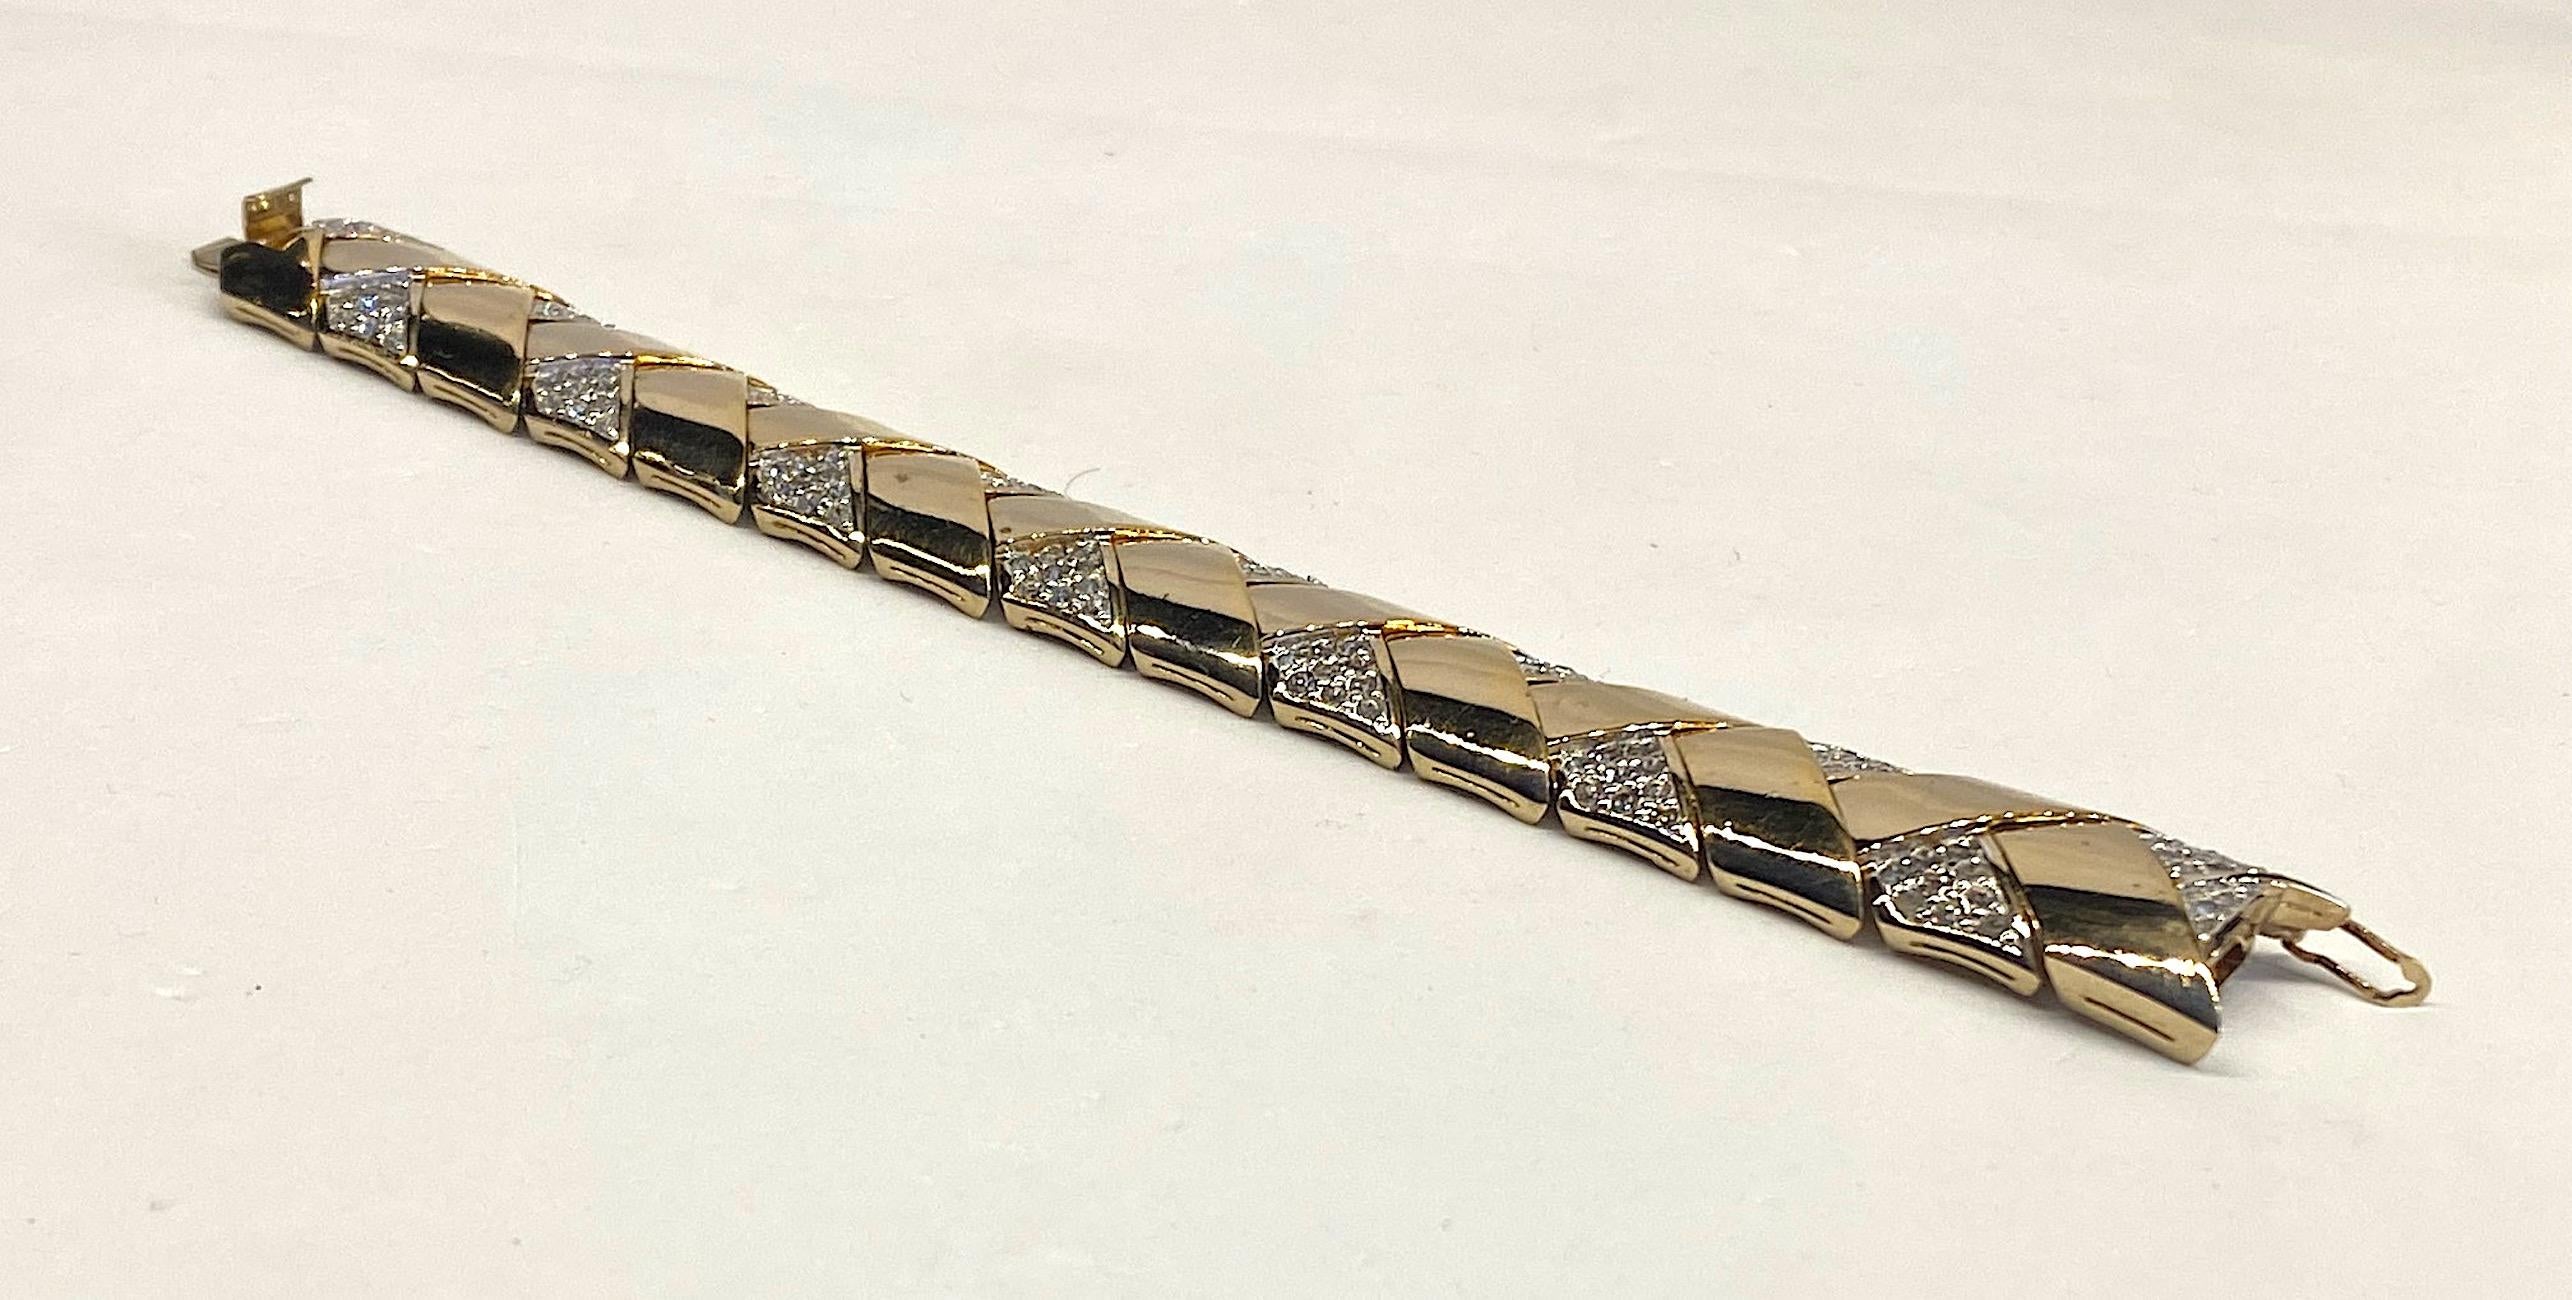 Beautifully made with a zig zag link design is this late 1970s to early 1980s Panetta bracelet. The The links are V shape in gold plate with on side in pave' rhinestone. Assembled as the bracelet the V shape links create a zig zag design. The